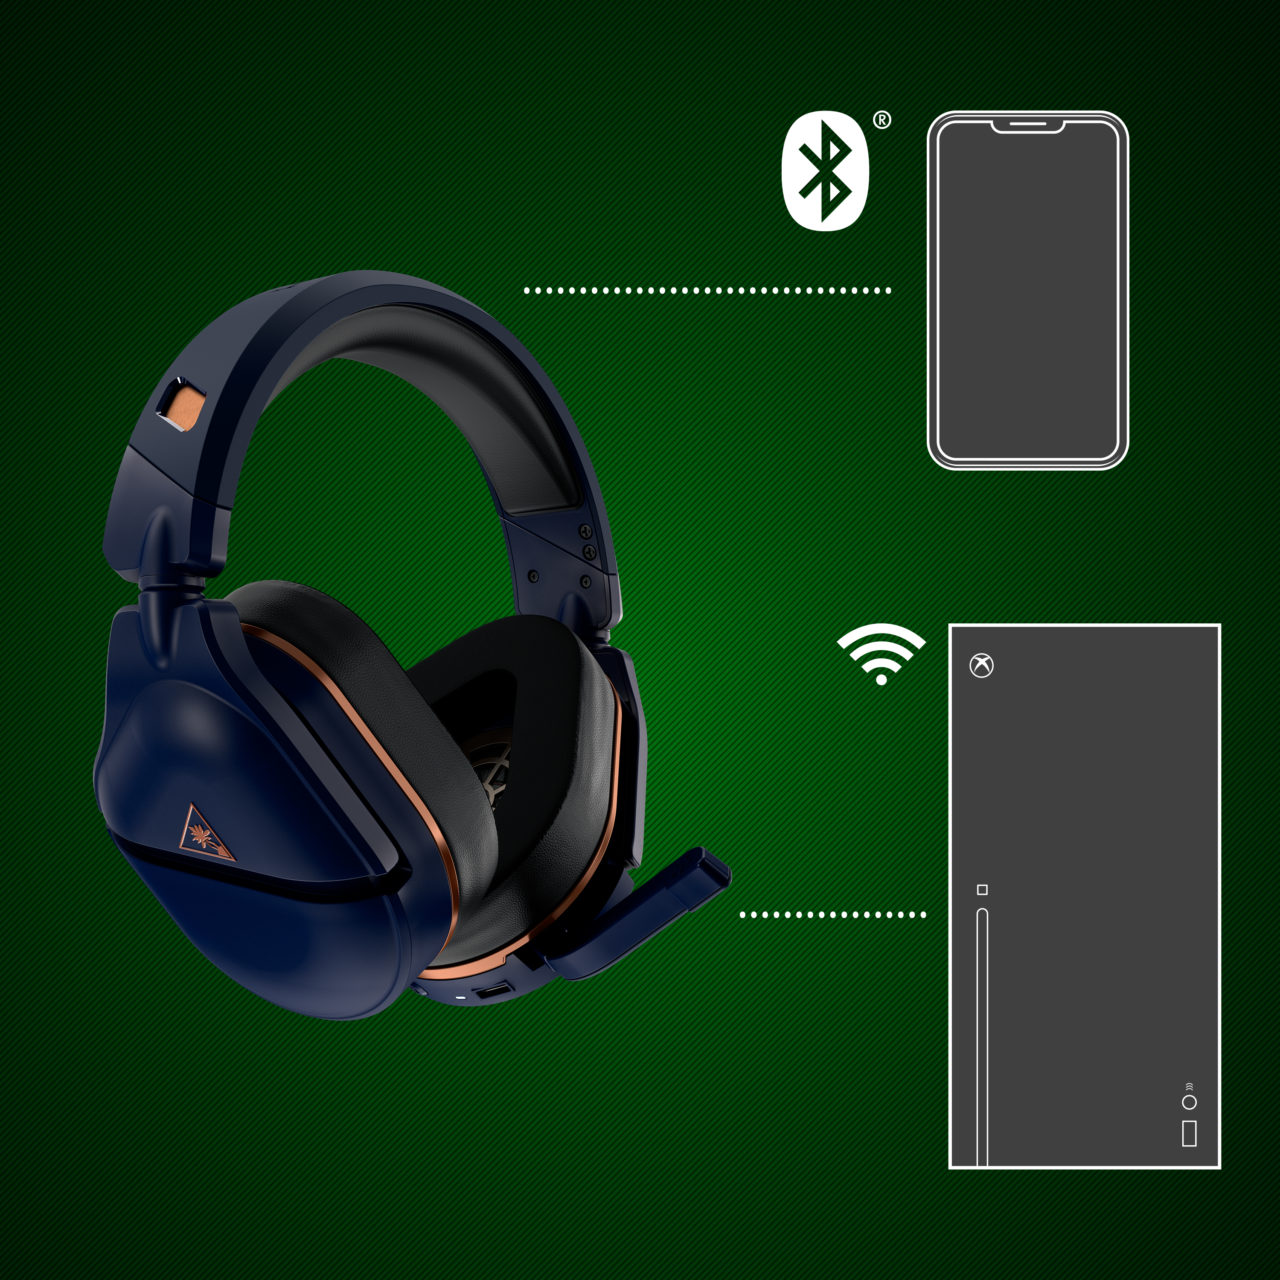 Turtle Beach Stealth 700 Gen 2 Max product image (Turtle Beach)